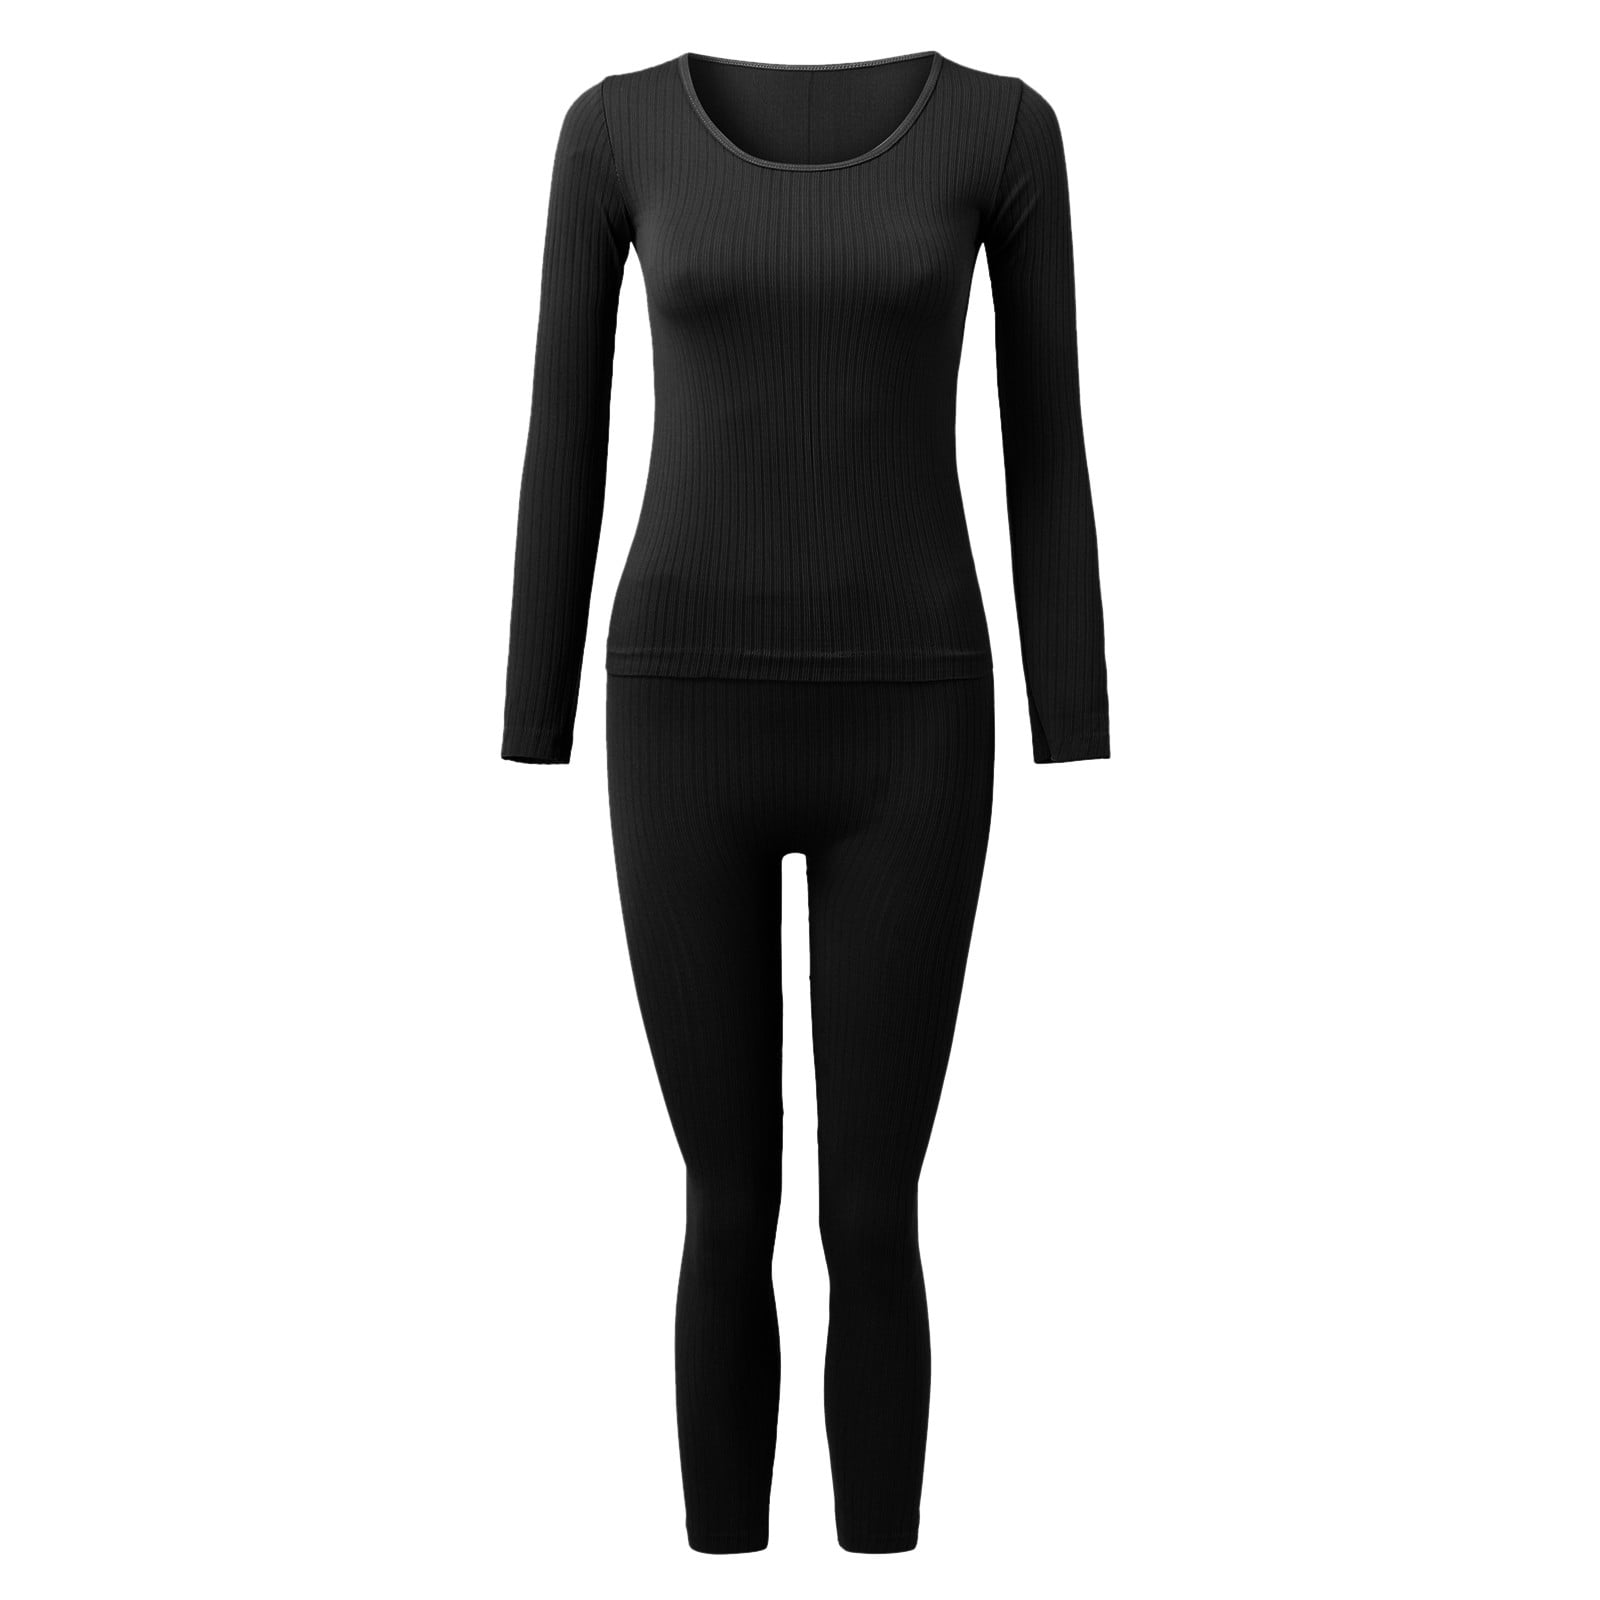 Women Casual 2PCS Outfits Sets Elastic Thermal Inner Wear Thermal Underwear  Warm Elastic Tops Pants 